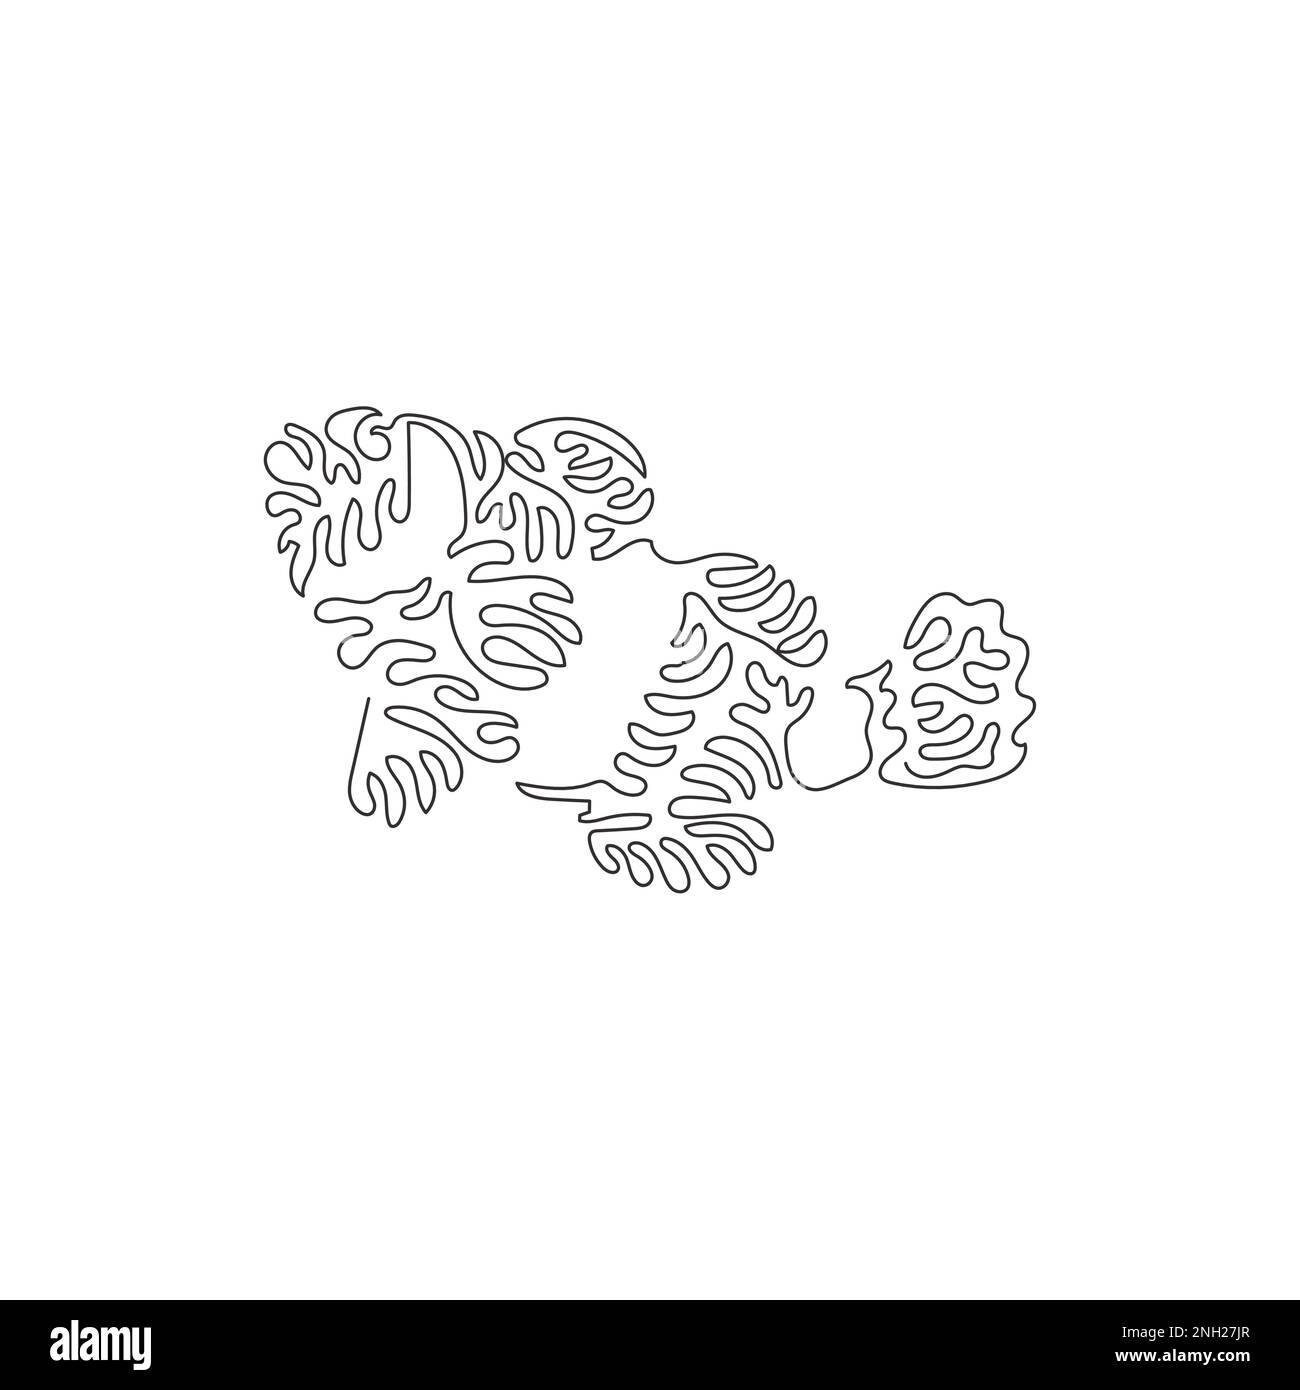 Single swirl continuous line drawing of frisky clownfish abstract art. Continuous line drawing design vector illustration style of beautiful clownfish Stock Vector